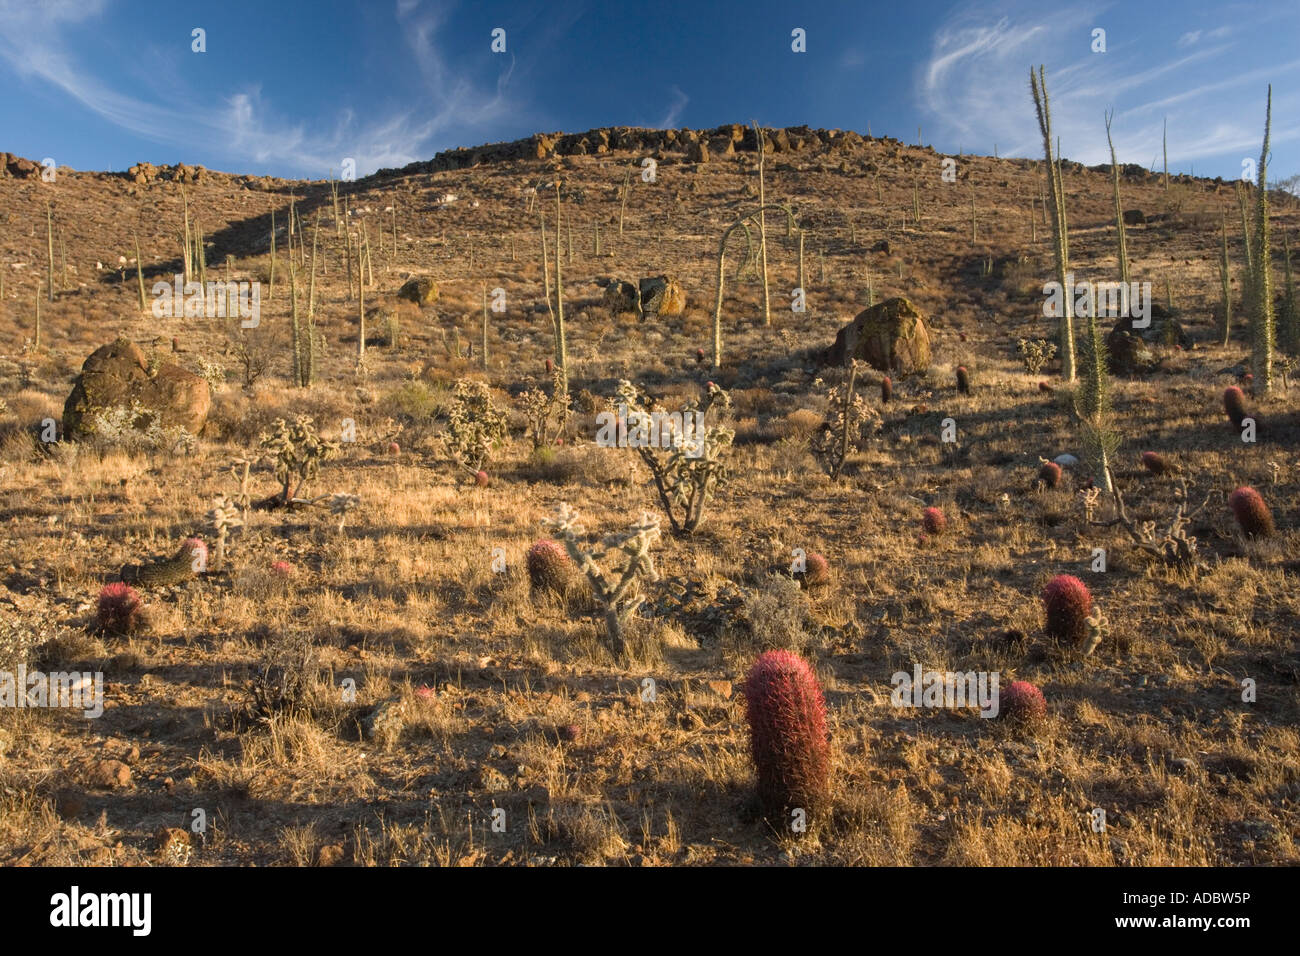 The cactus rich part of the Sonoran desert on the west side of Baja California including red barrel cactus and chollas, Mexico Stock Photo